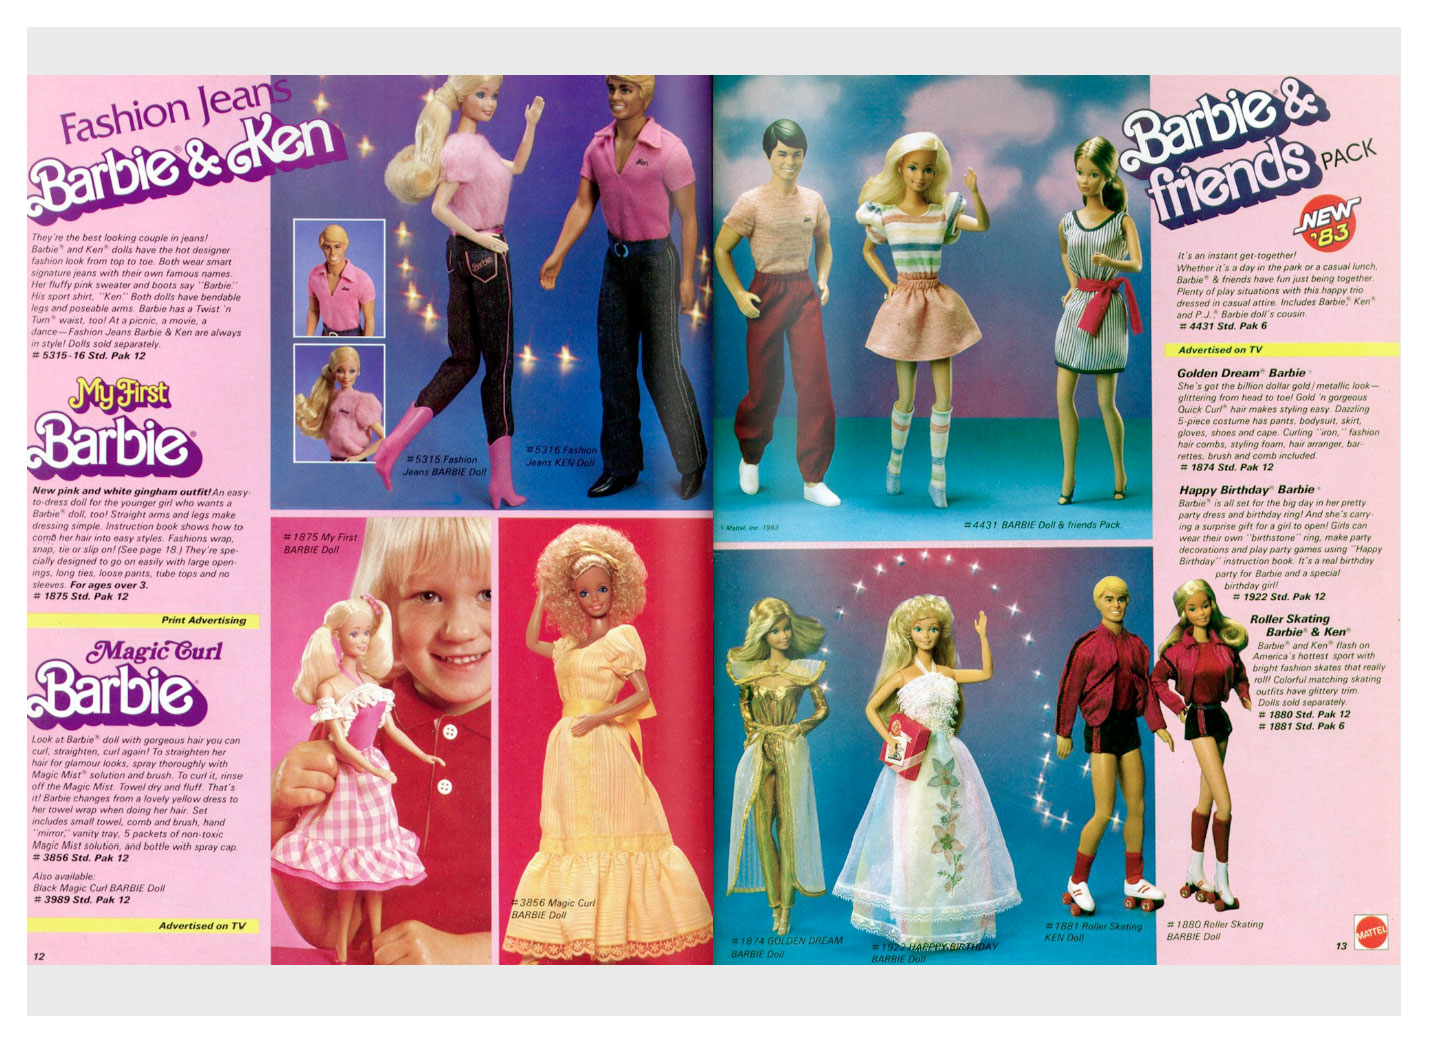 From 1983 Mattel Toys catalogue